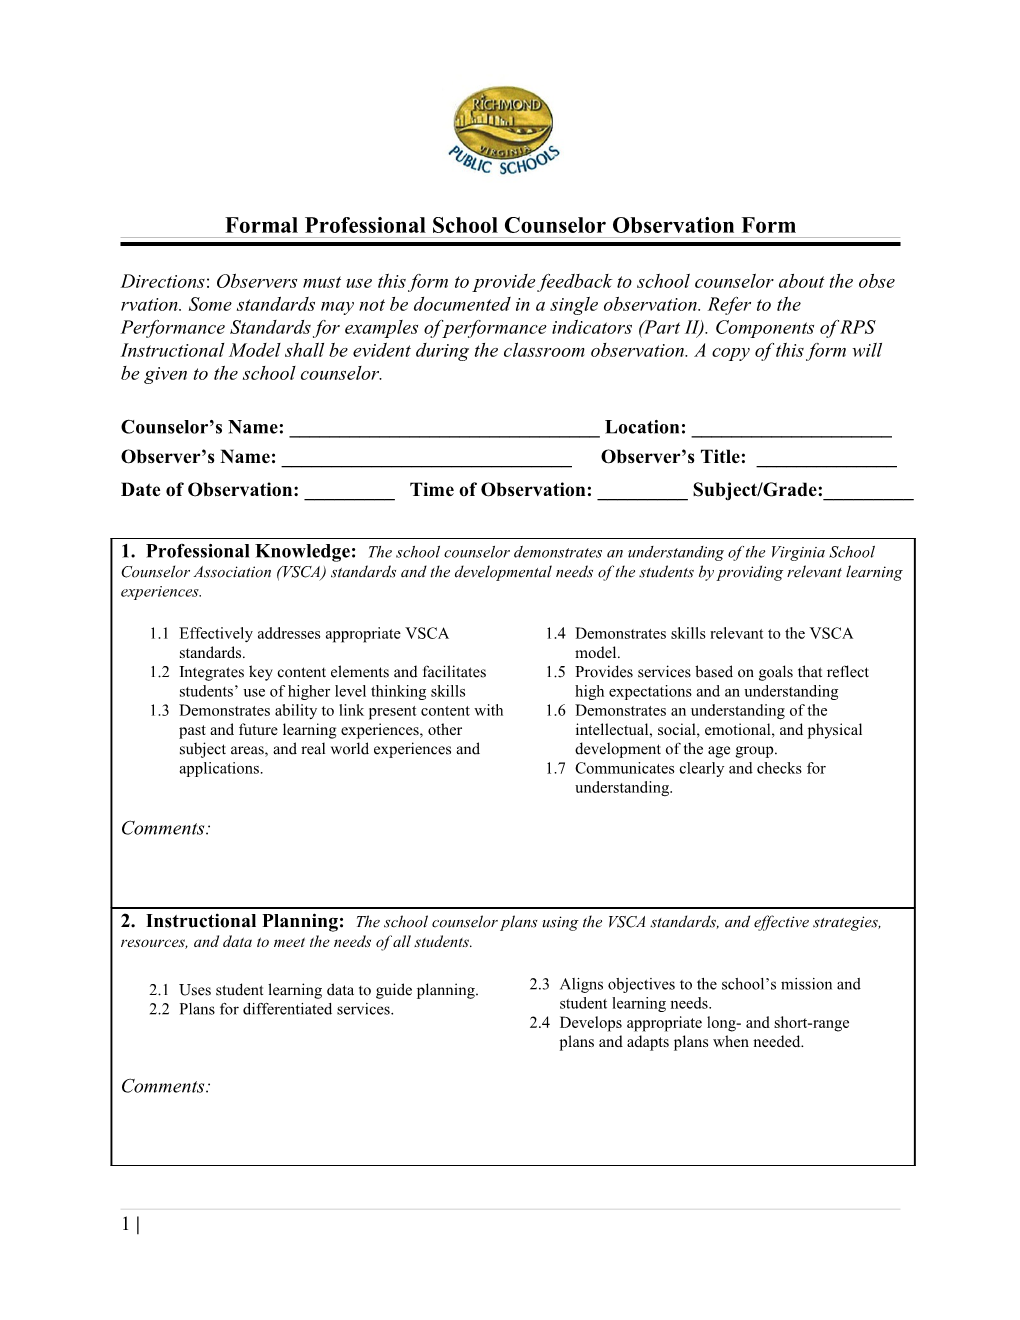 Formal Professional School Counselor Observation Form